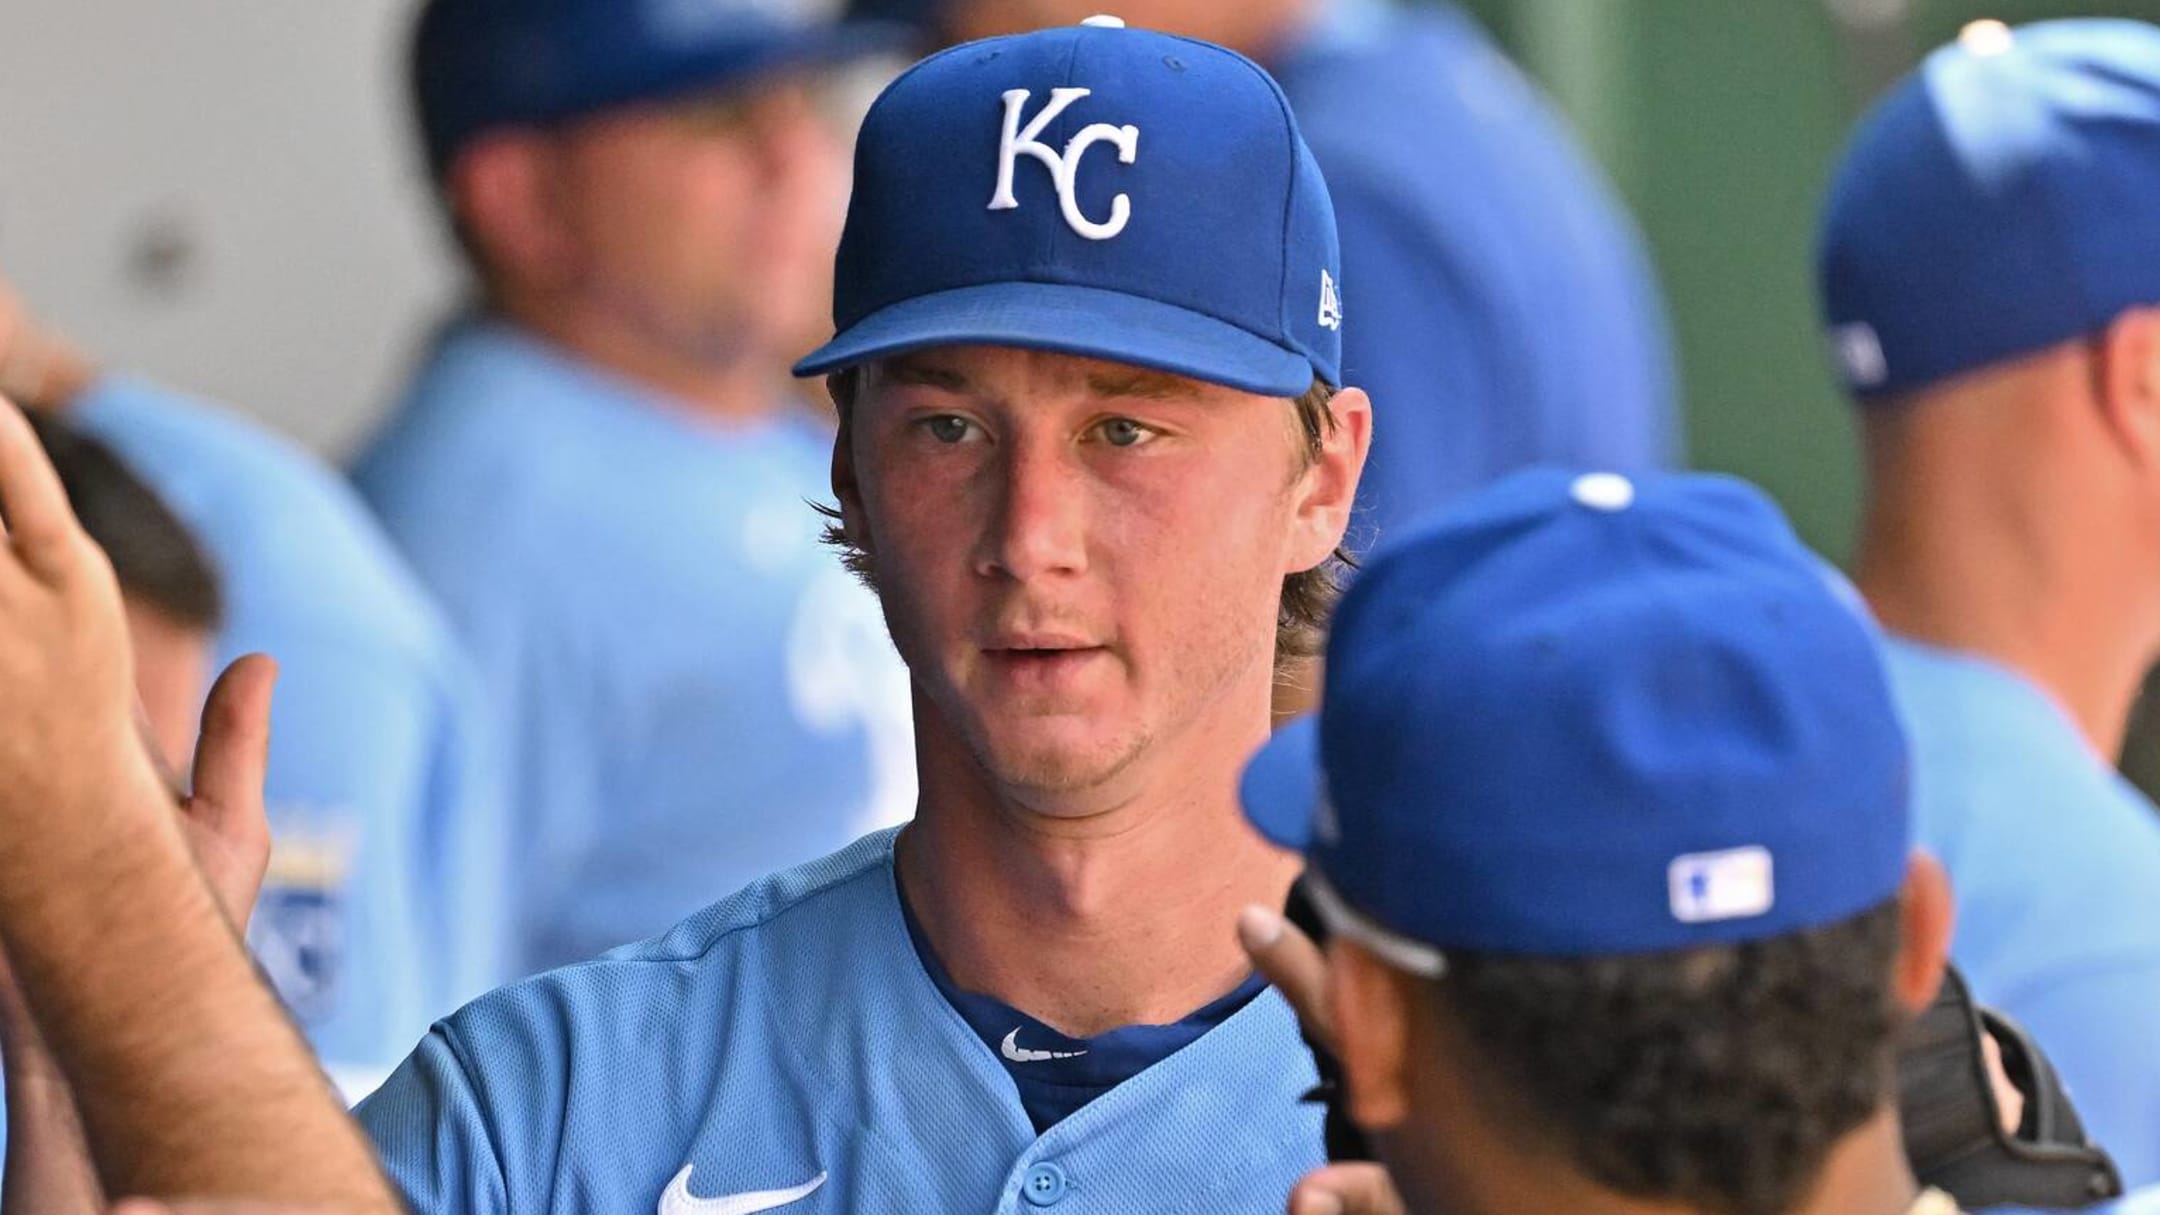 Brady Singer loses arbitration hearing against Royals